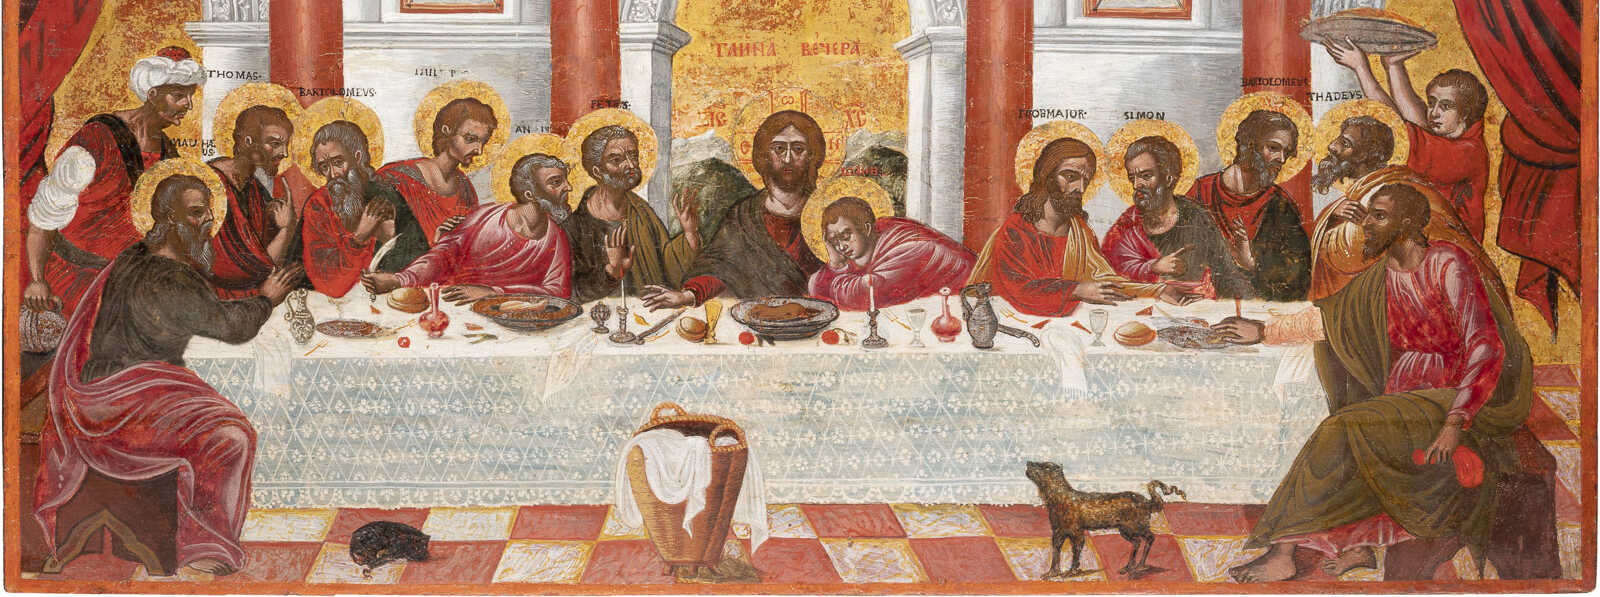 A VERY RARE AND MONUMENTAL ICON SHOWING THE LAST SUPPER Ven